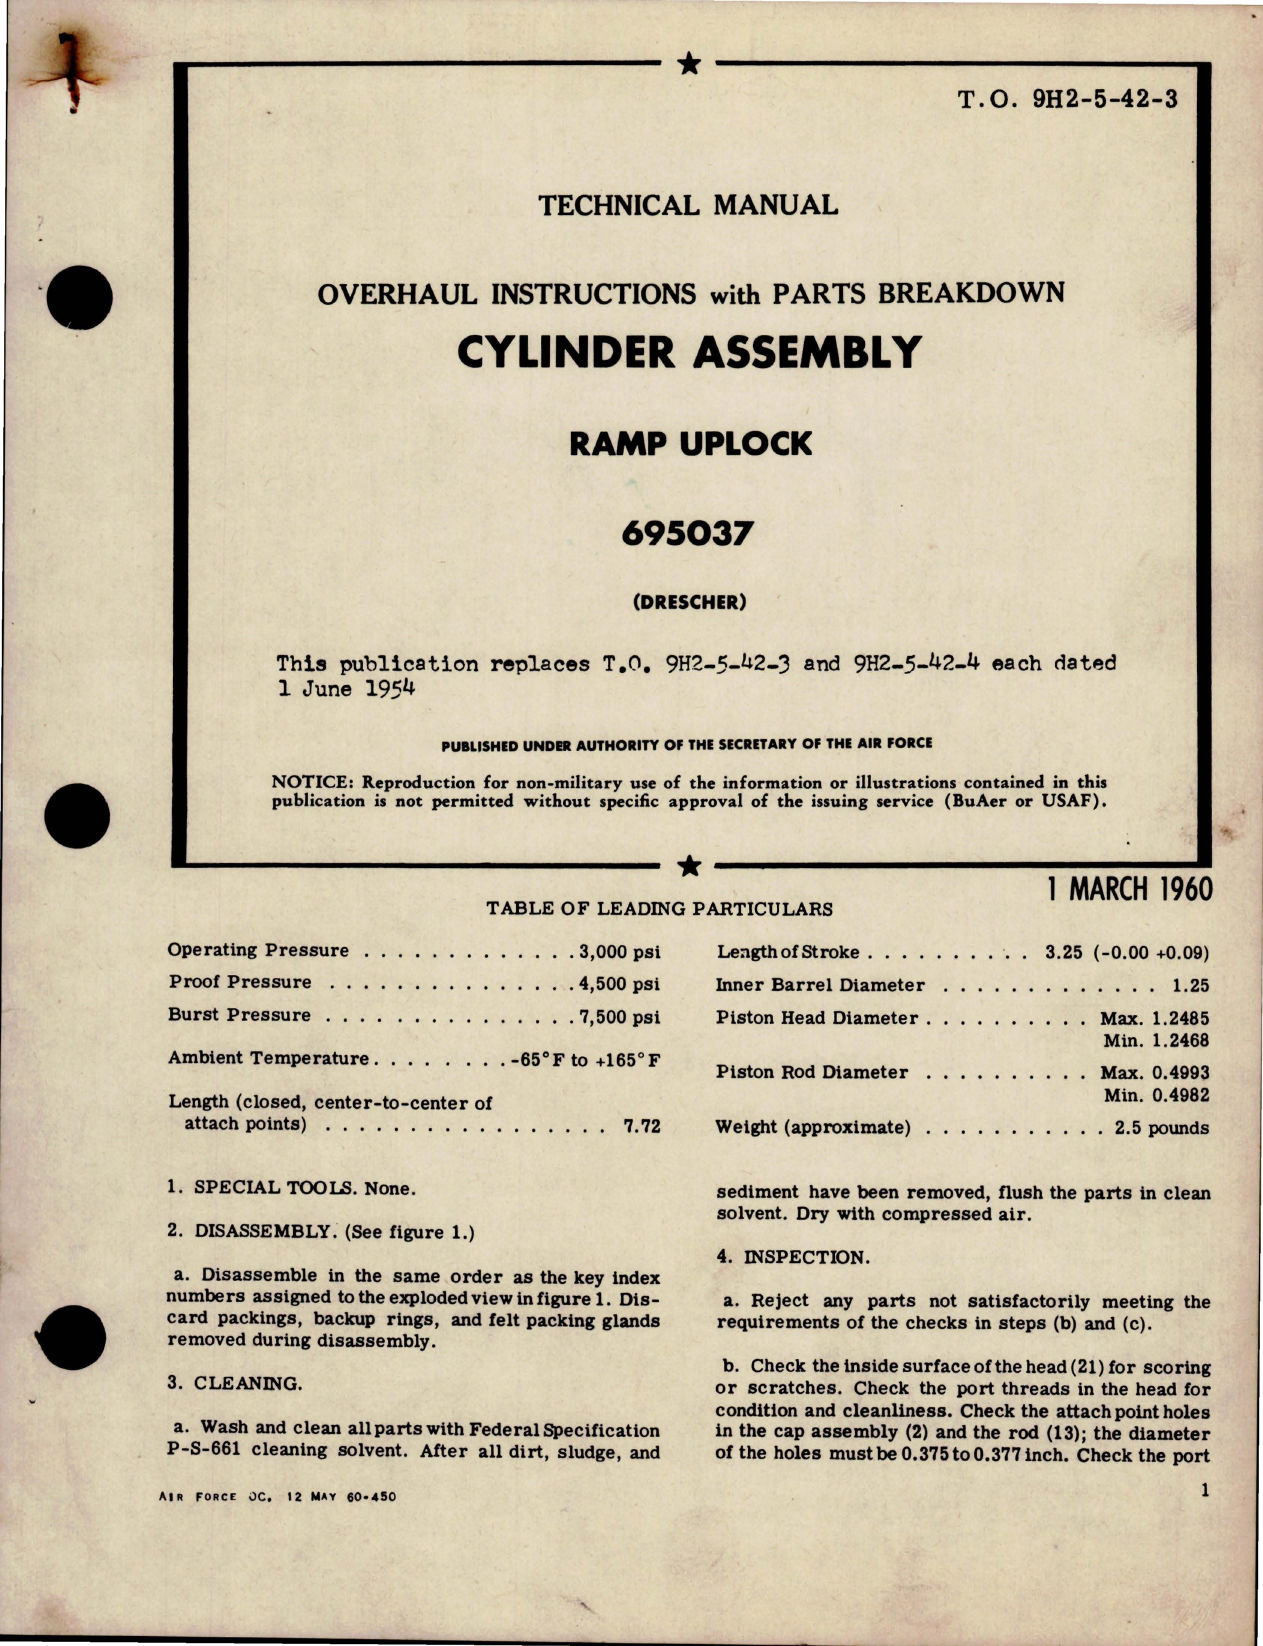 Sample page 1 from AirCorps Library document: Overhaul Instructions with Parts for Cylinder Assembly - Ramp Uplock - Part 695037 